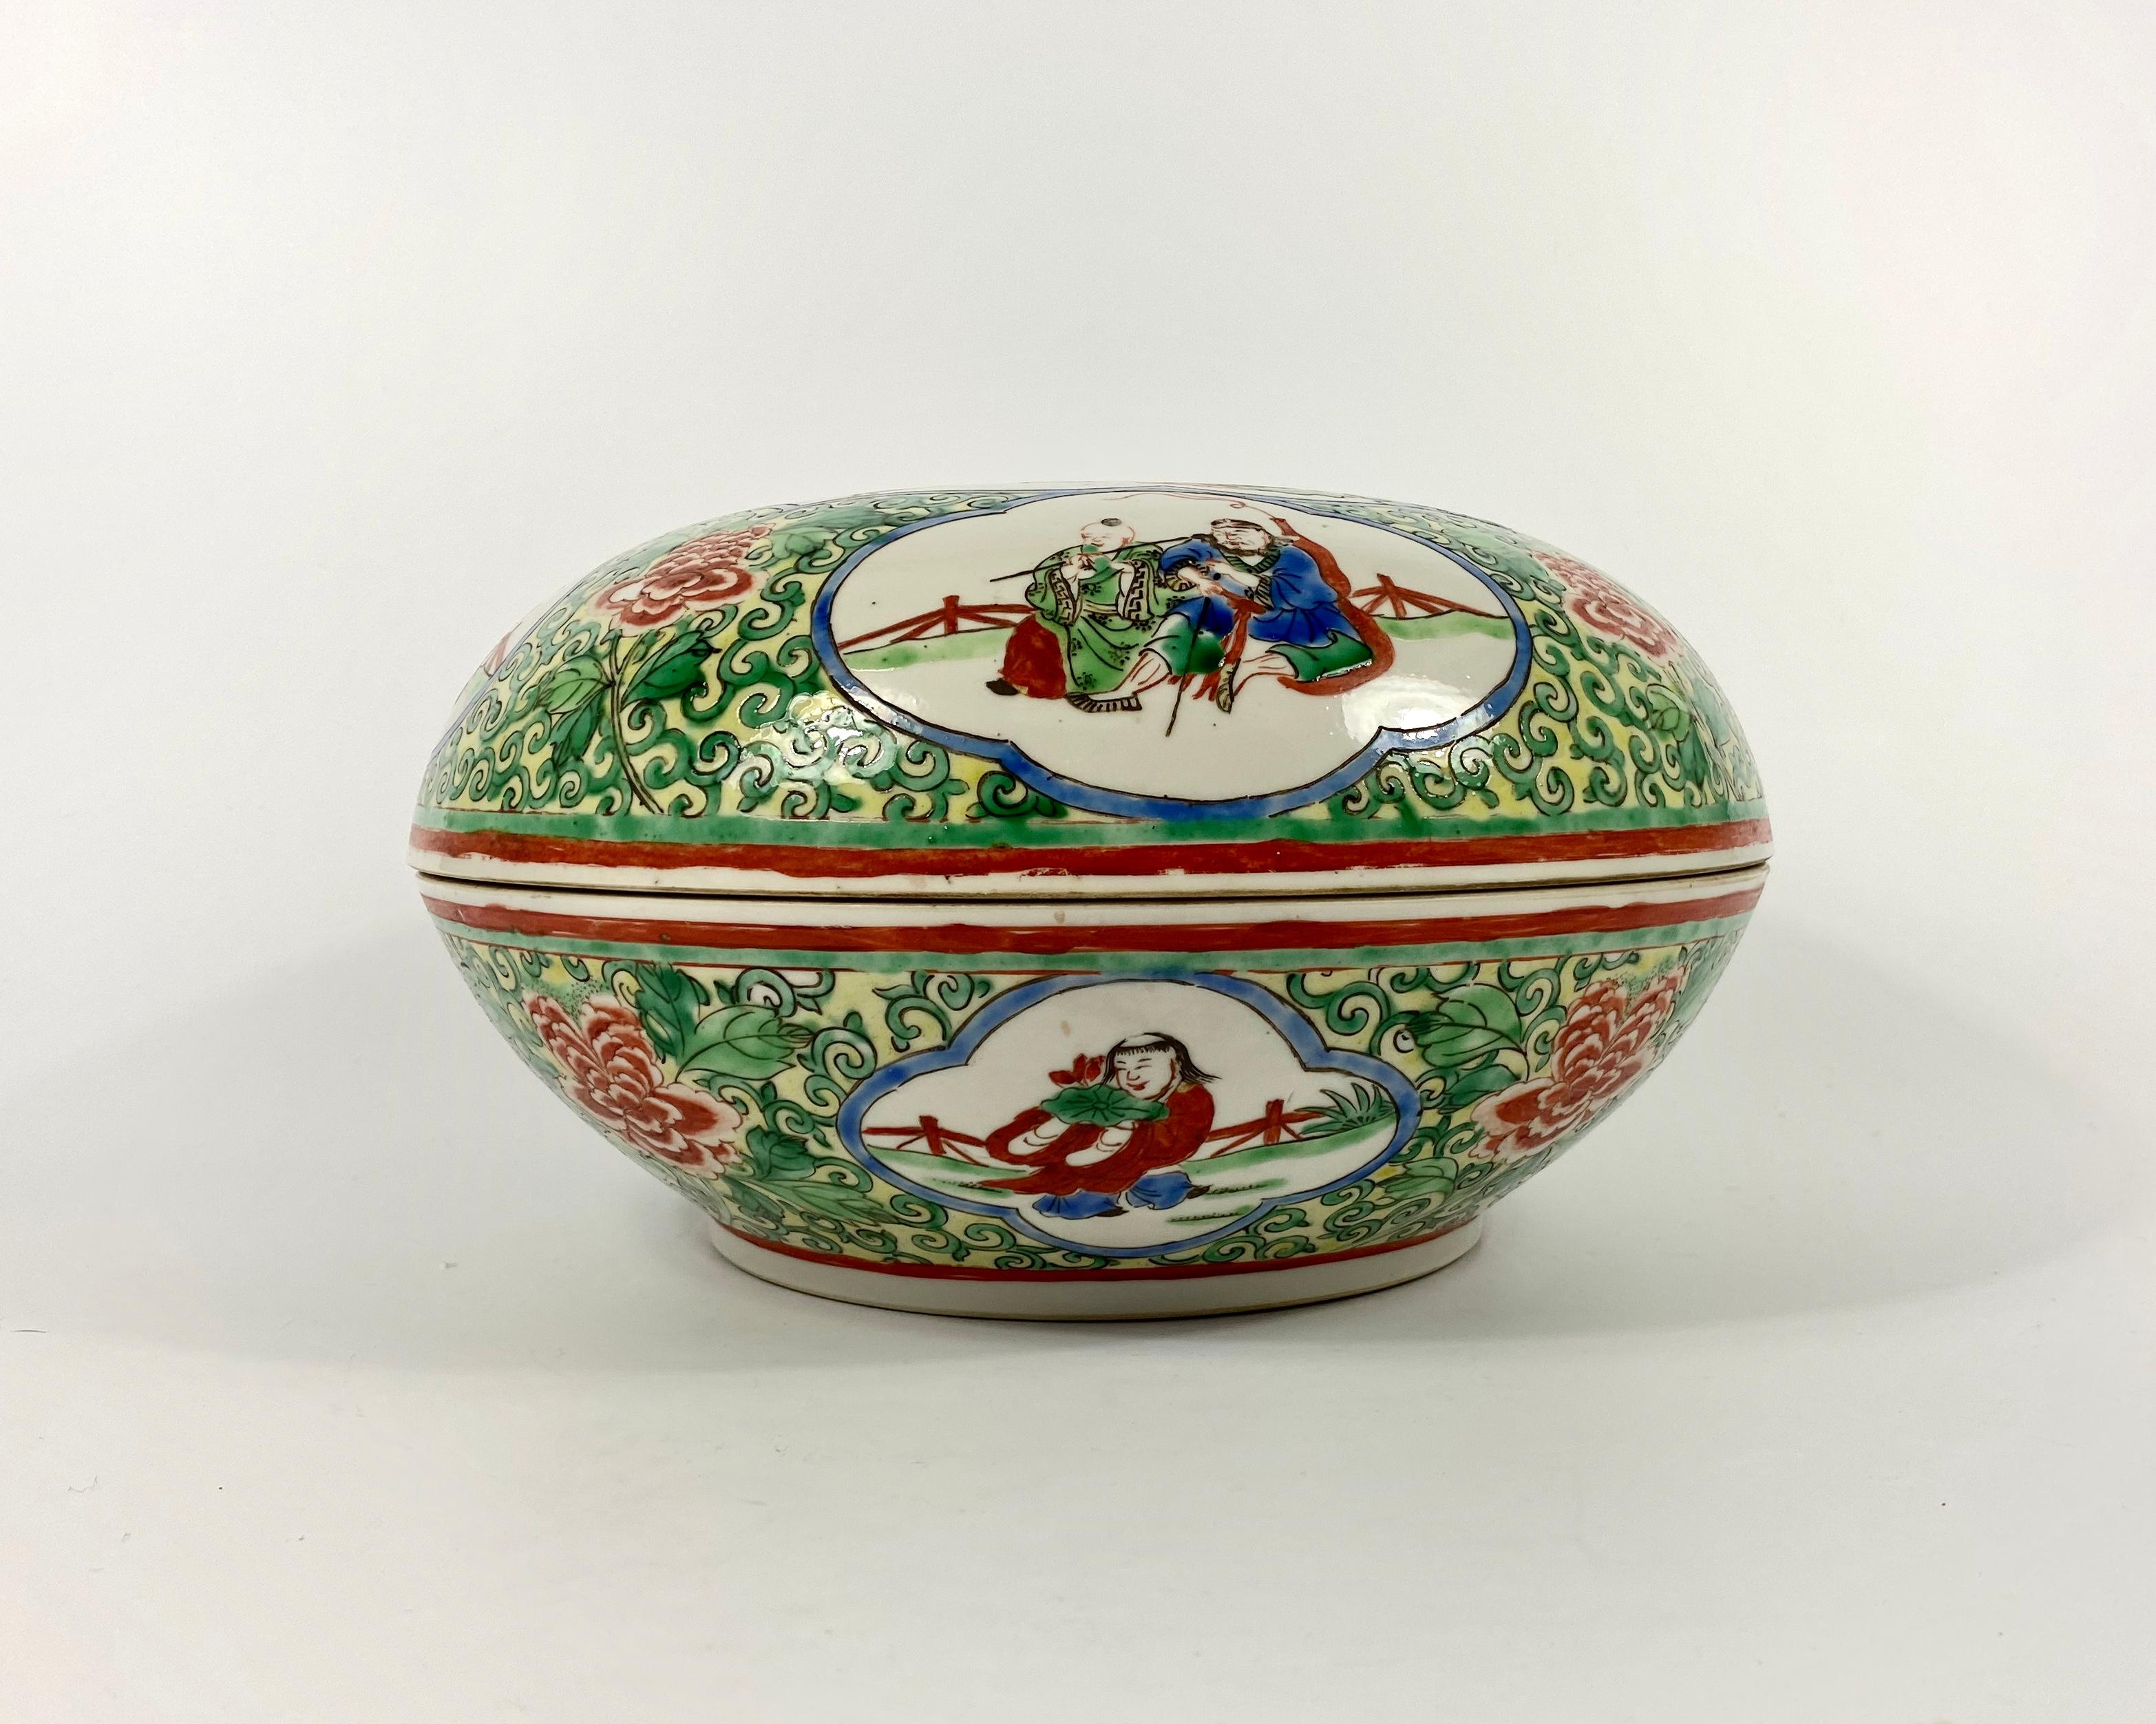 Large Chinese Porcelain Box and Cover, Famille Verte, circa 1900, Qing Dynasty 5